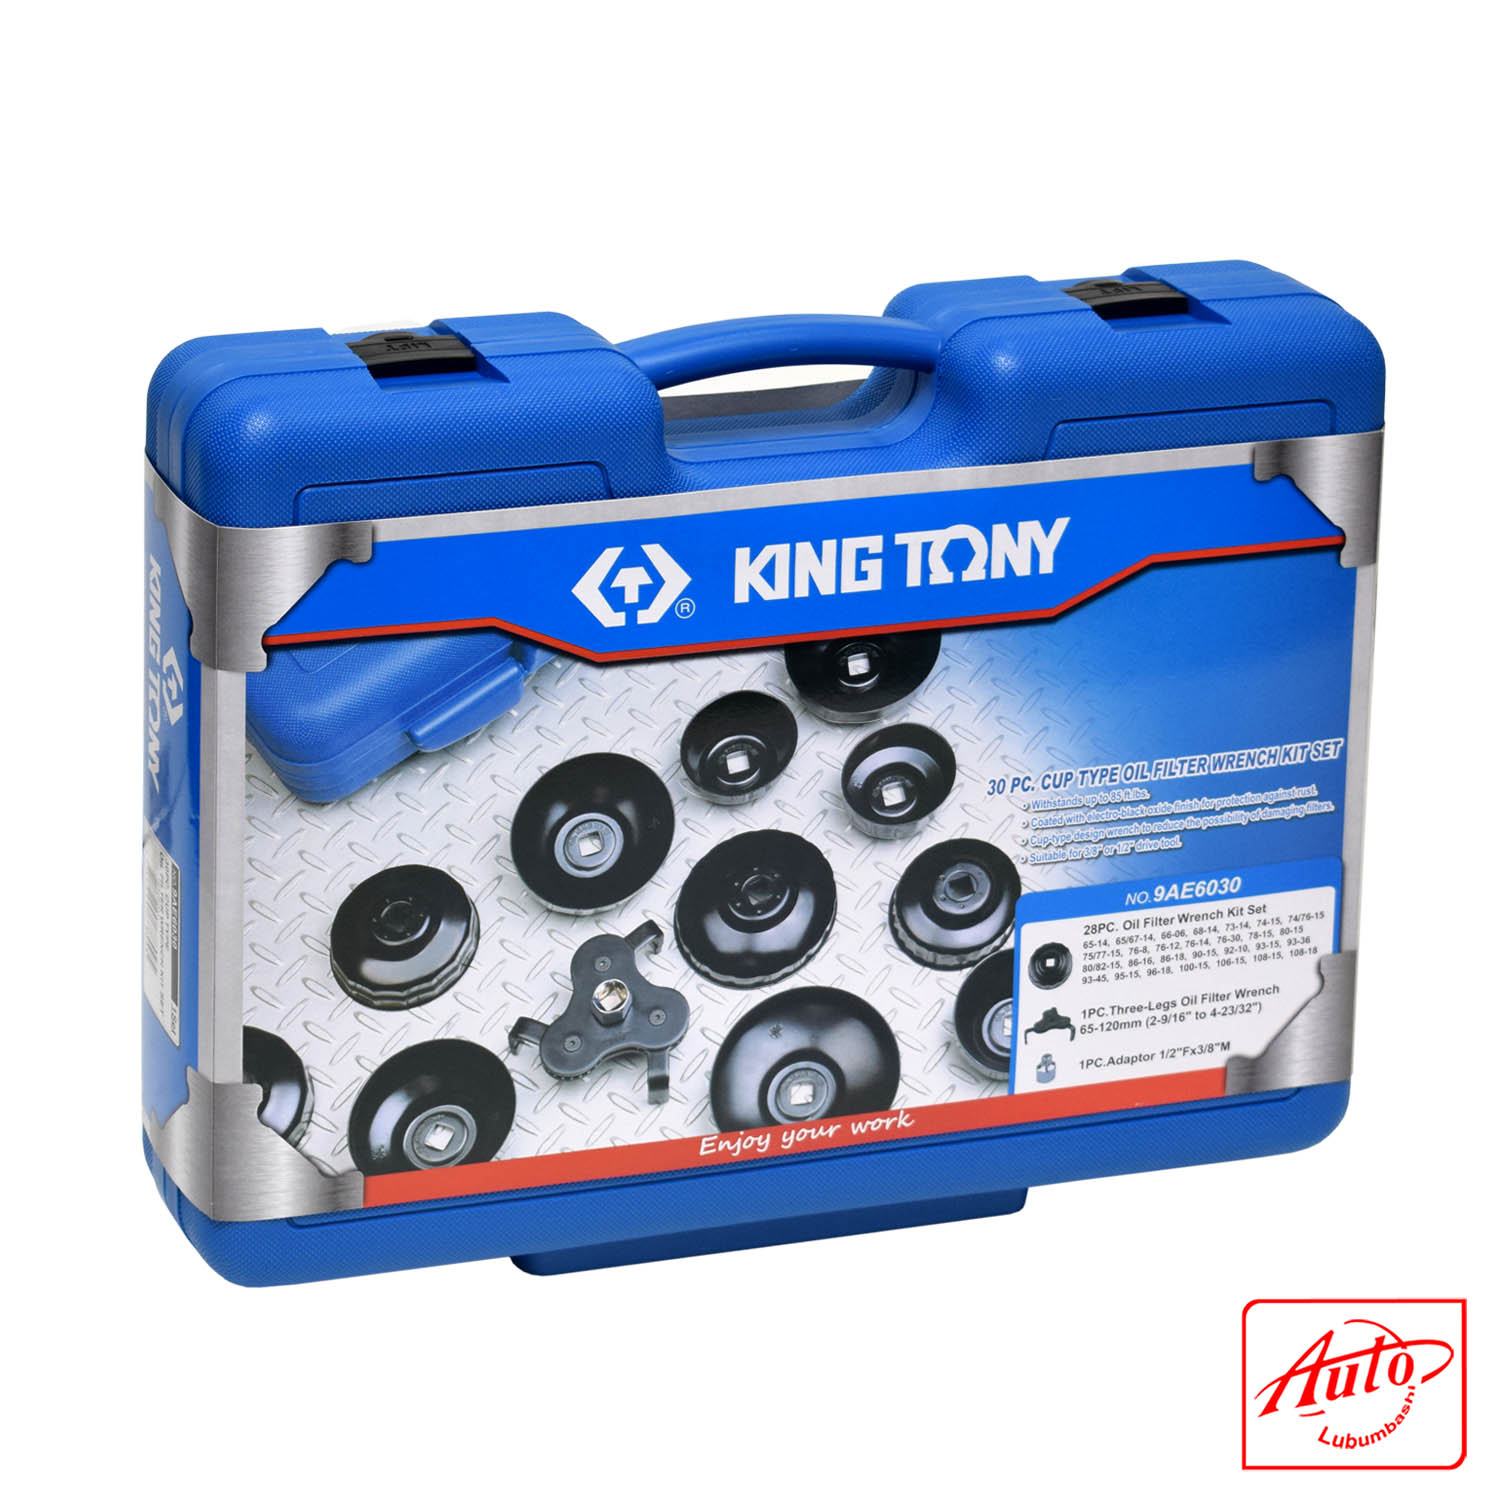 30PC.CUP TYPE OIL FILTER WRENCH SET - KING TONY